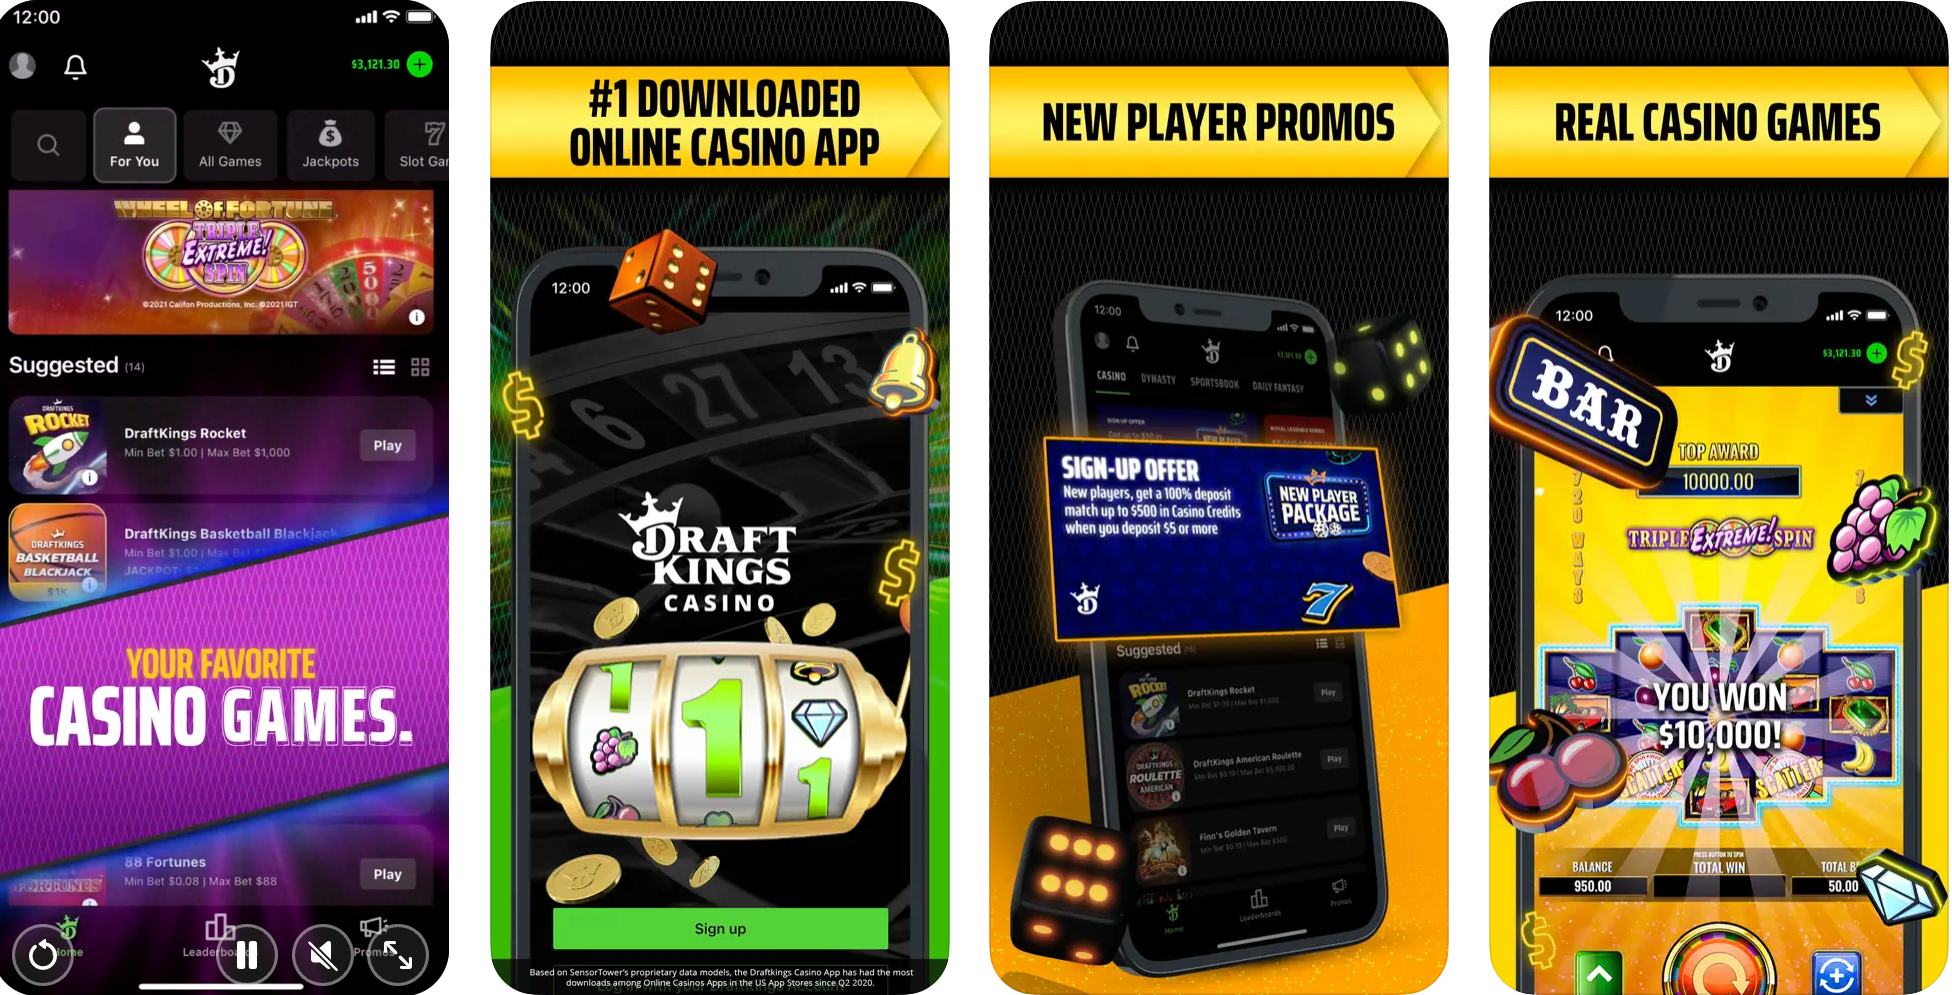 Lucky Legends Casino on the App Store